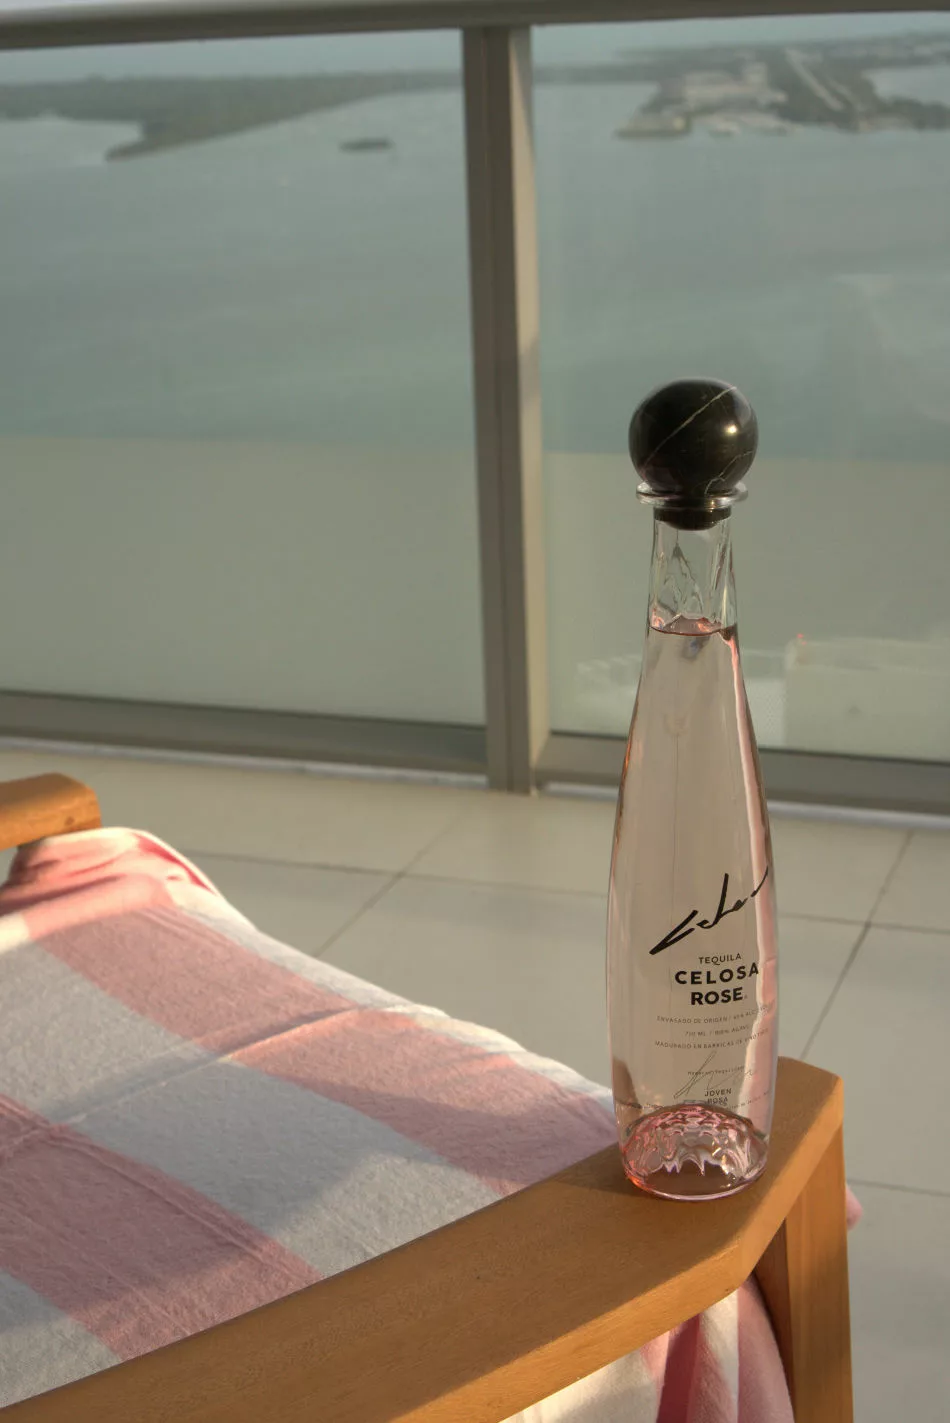 A bottle of Celosa Rosa Tequila, recommended for shots, sits on a chair with an ocean view in the background.